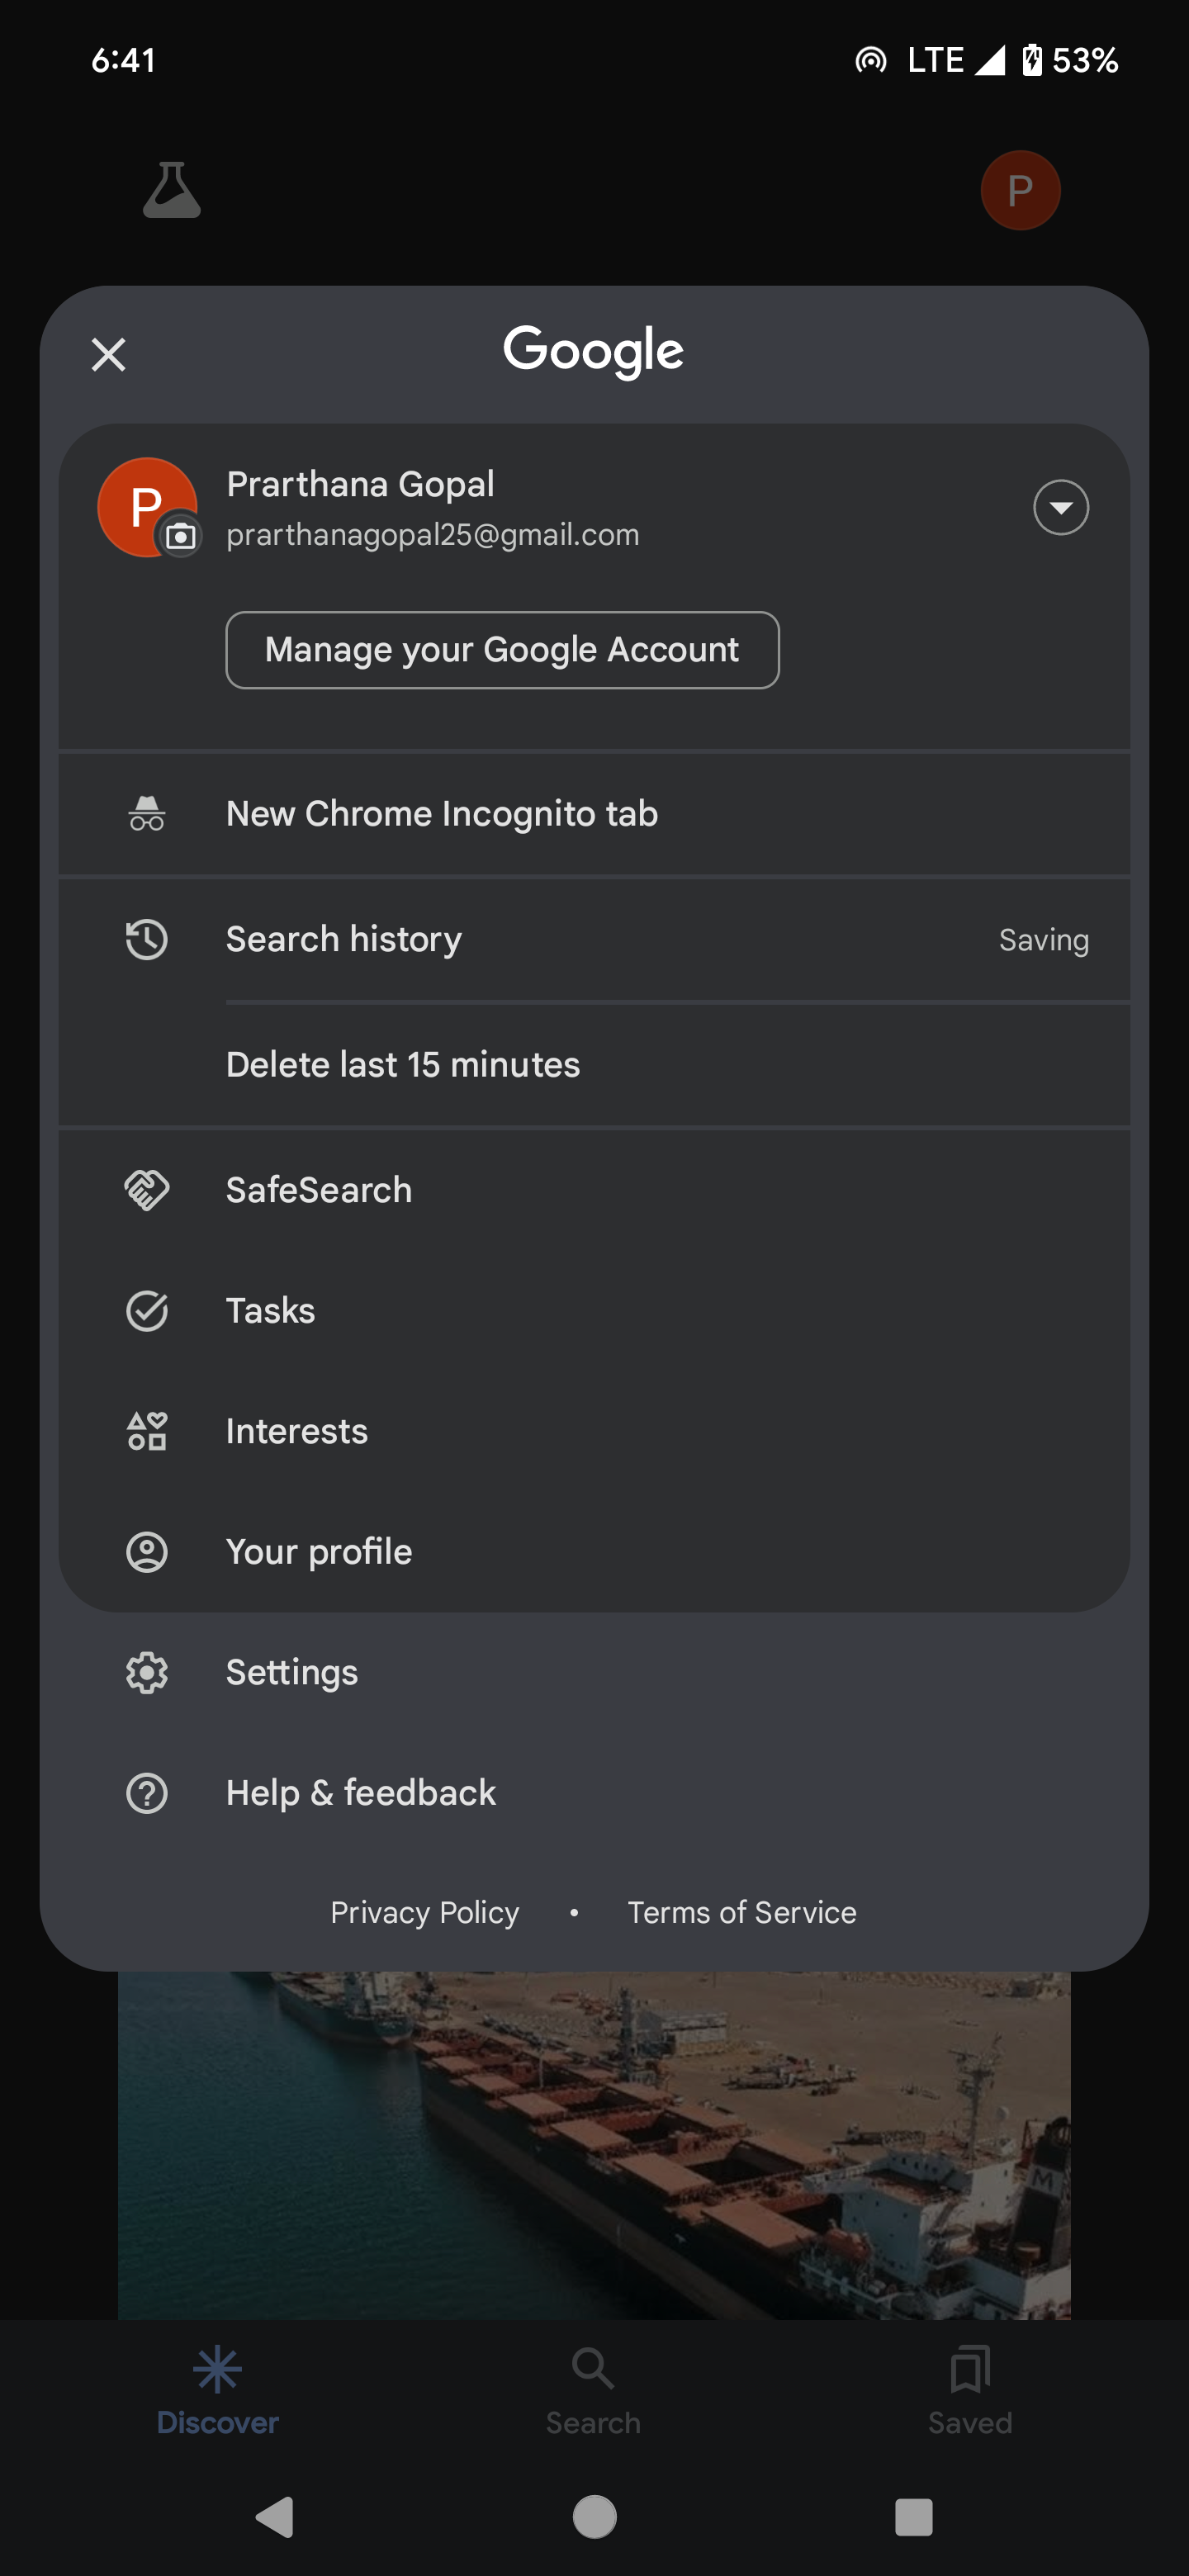 Select Settings from the options.